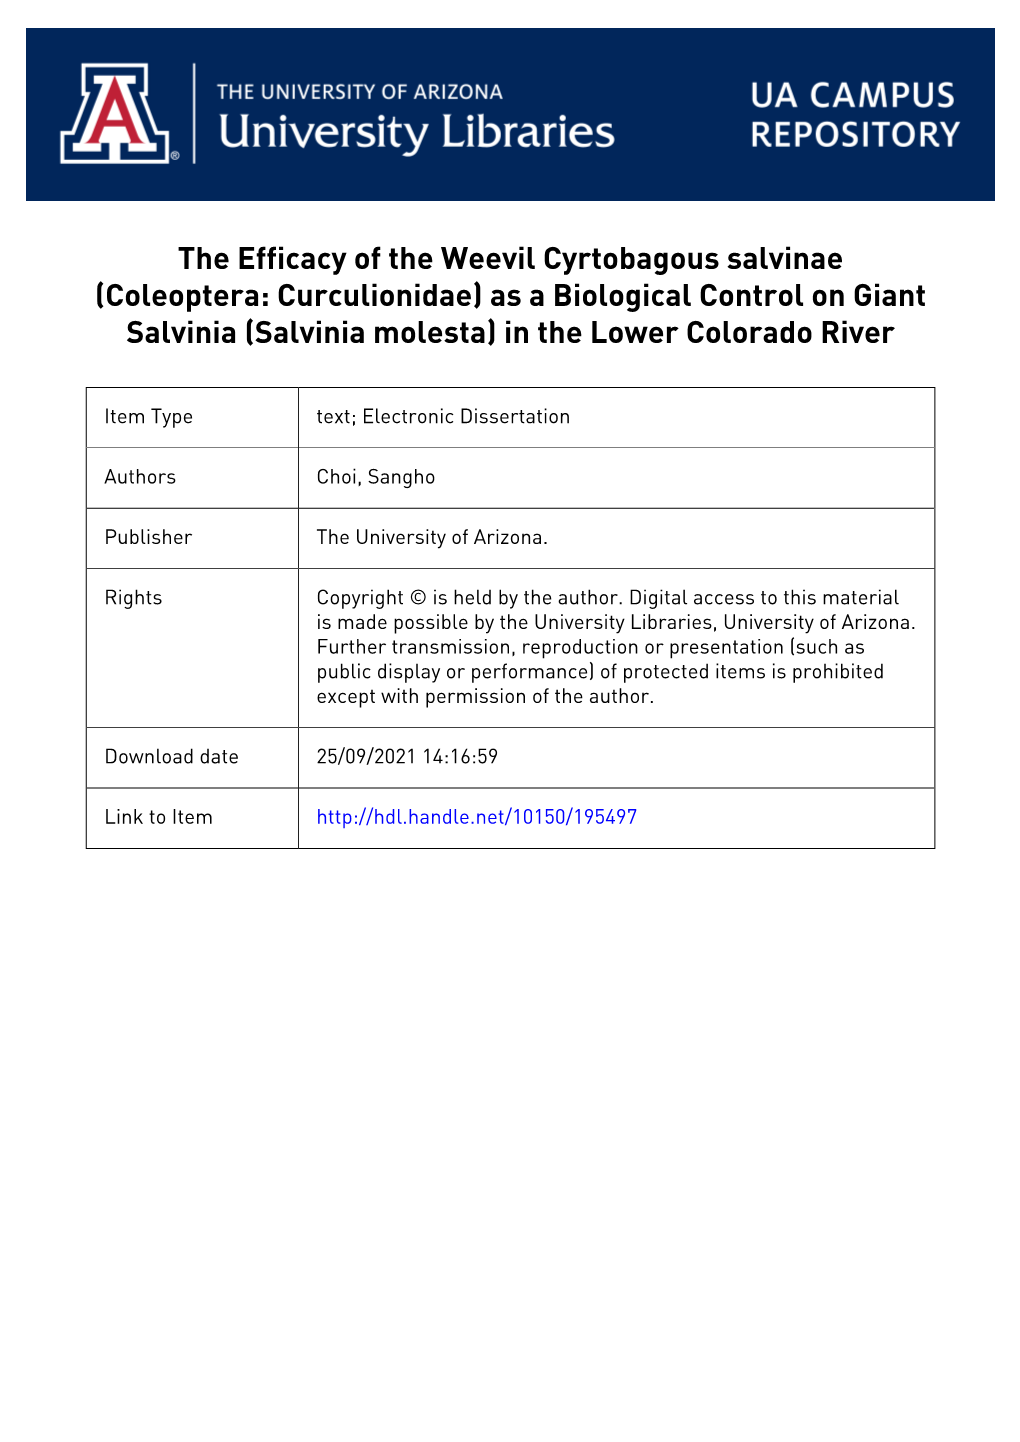 THE EFFICACY of the WEEVIL Cyrtobagous Salviniae